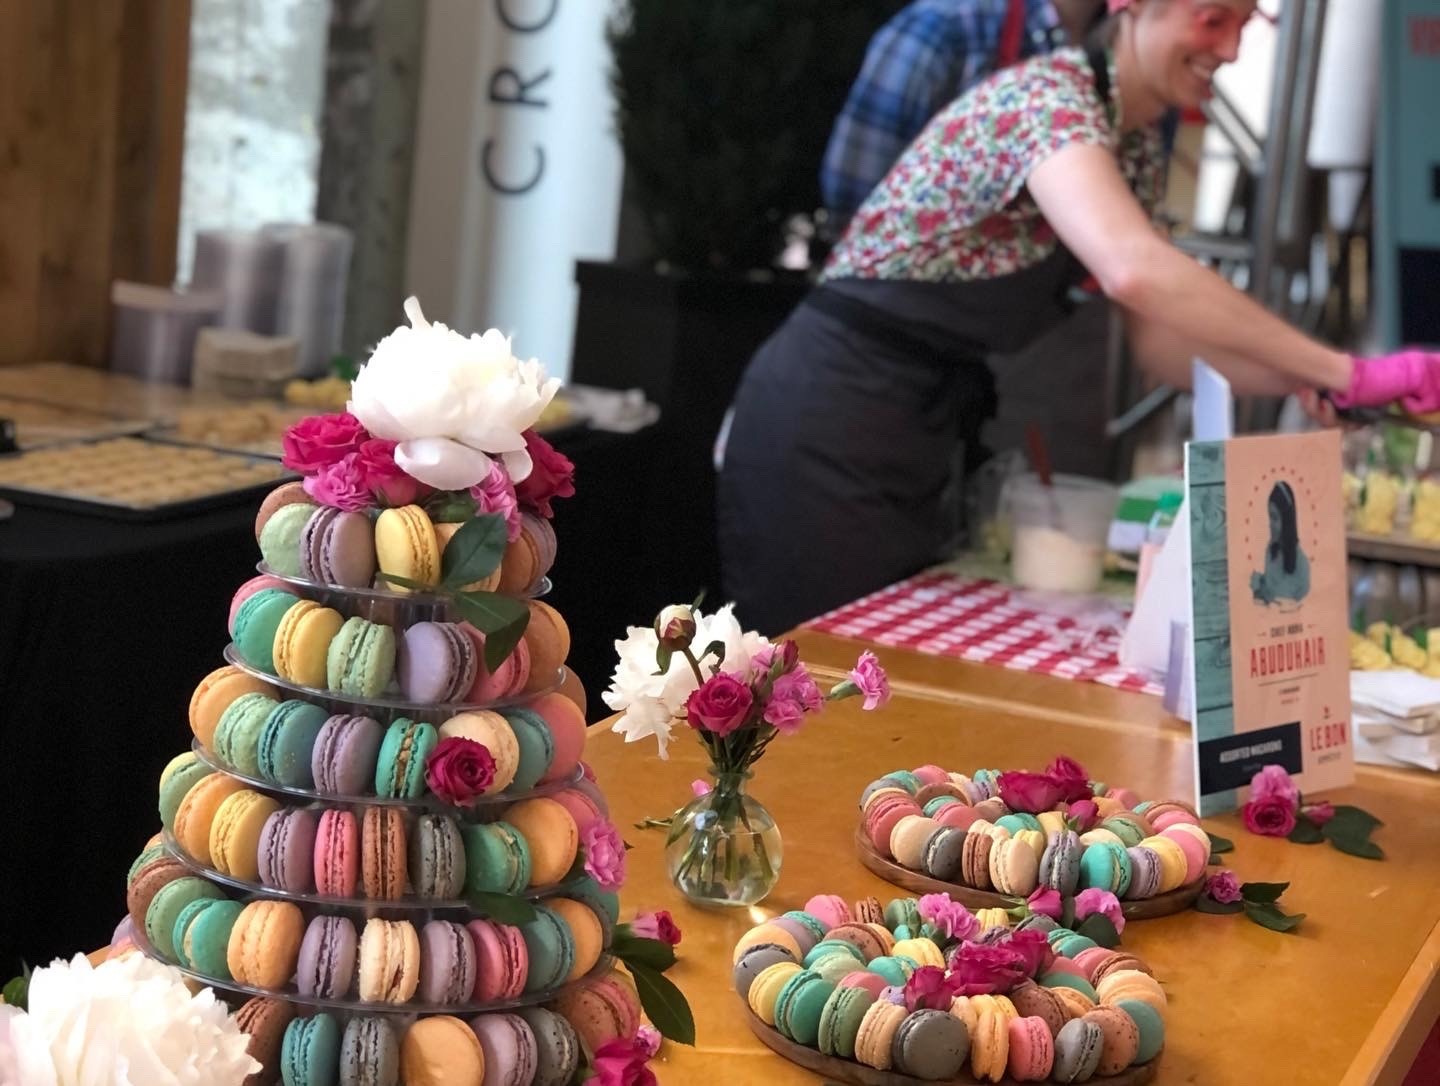 A tall display of colorful macaroons at the Le Bon Apetit fundraiser.